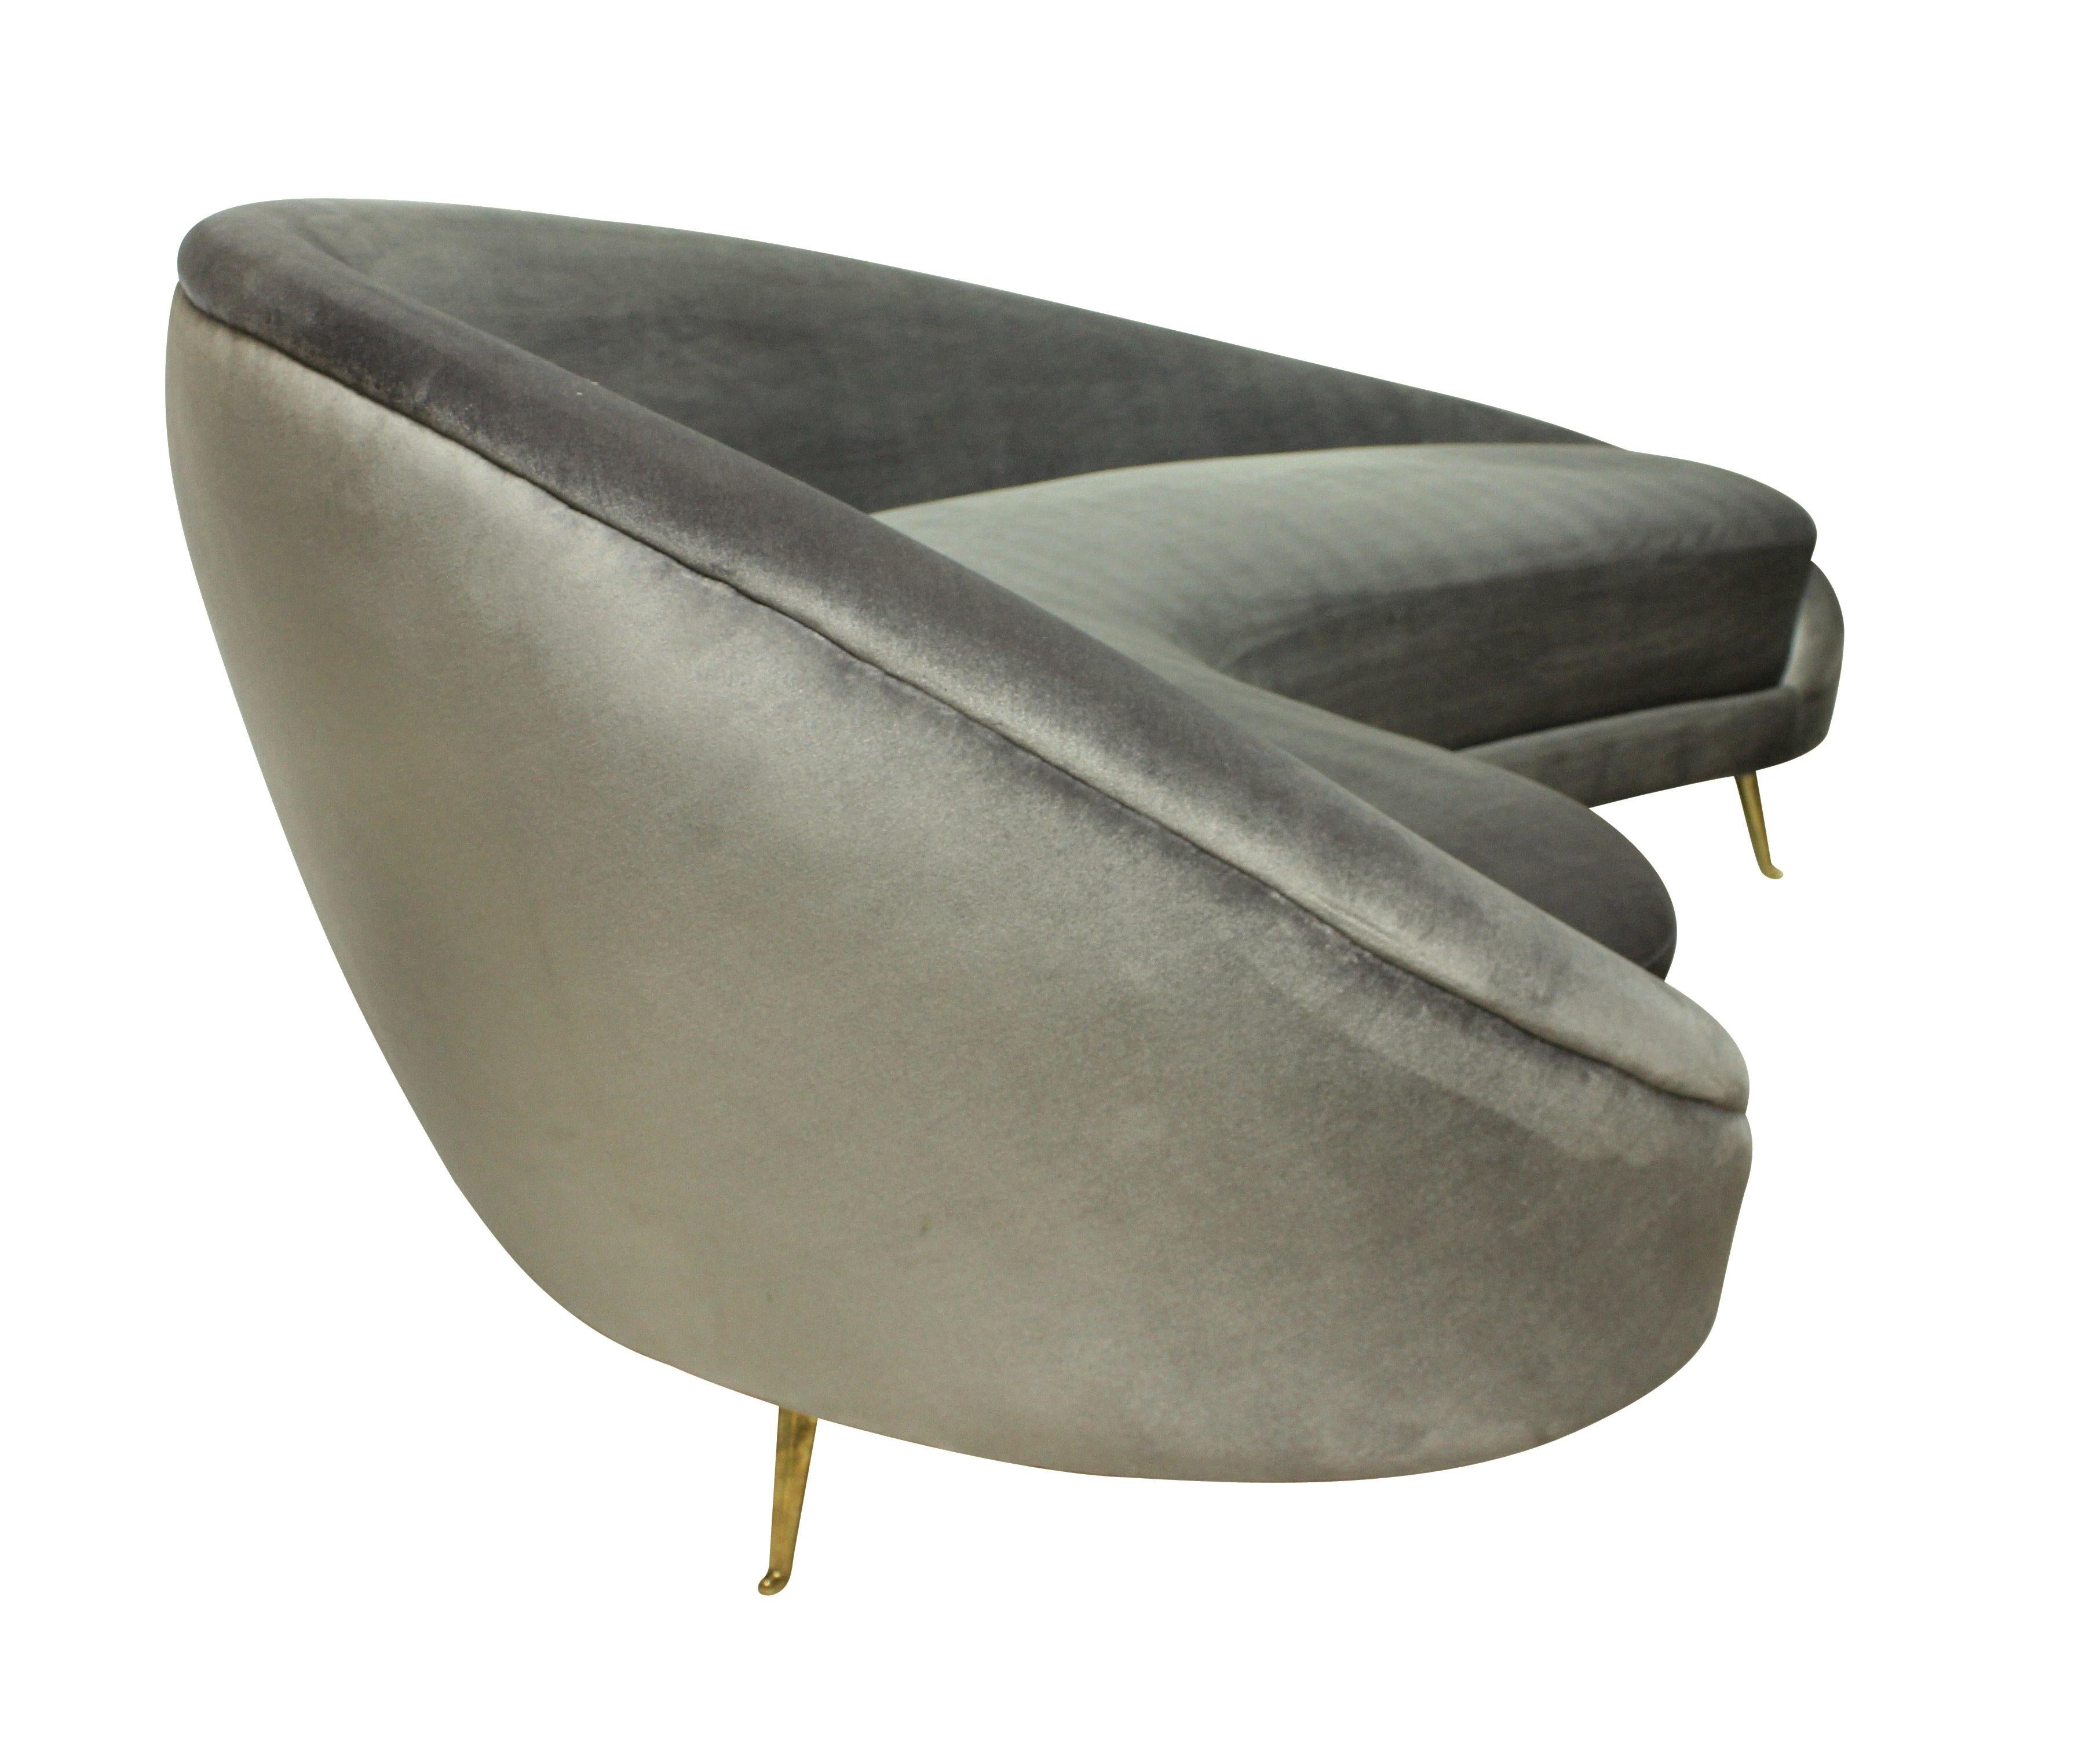 Italian Large Iconic Sculptural Curved Sofa in the Style of Ico Parisi